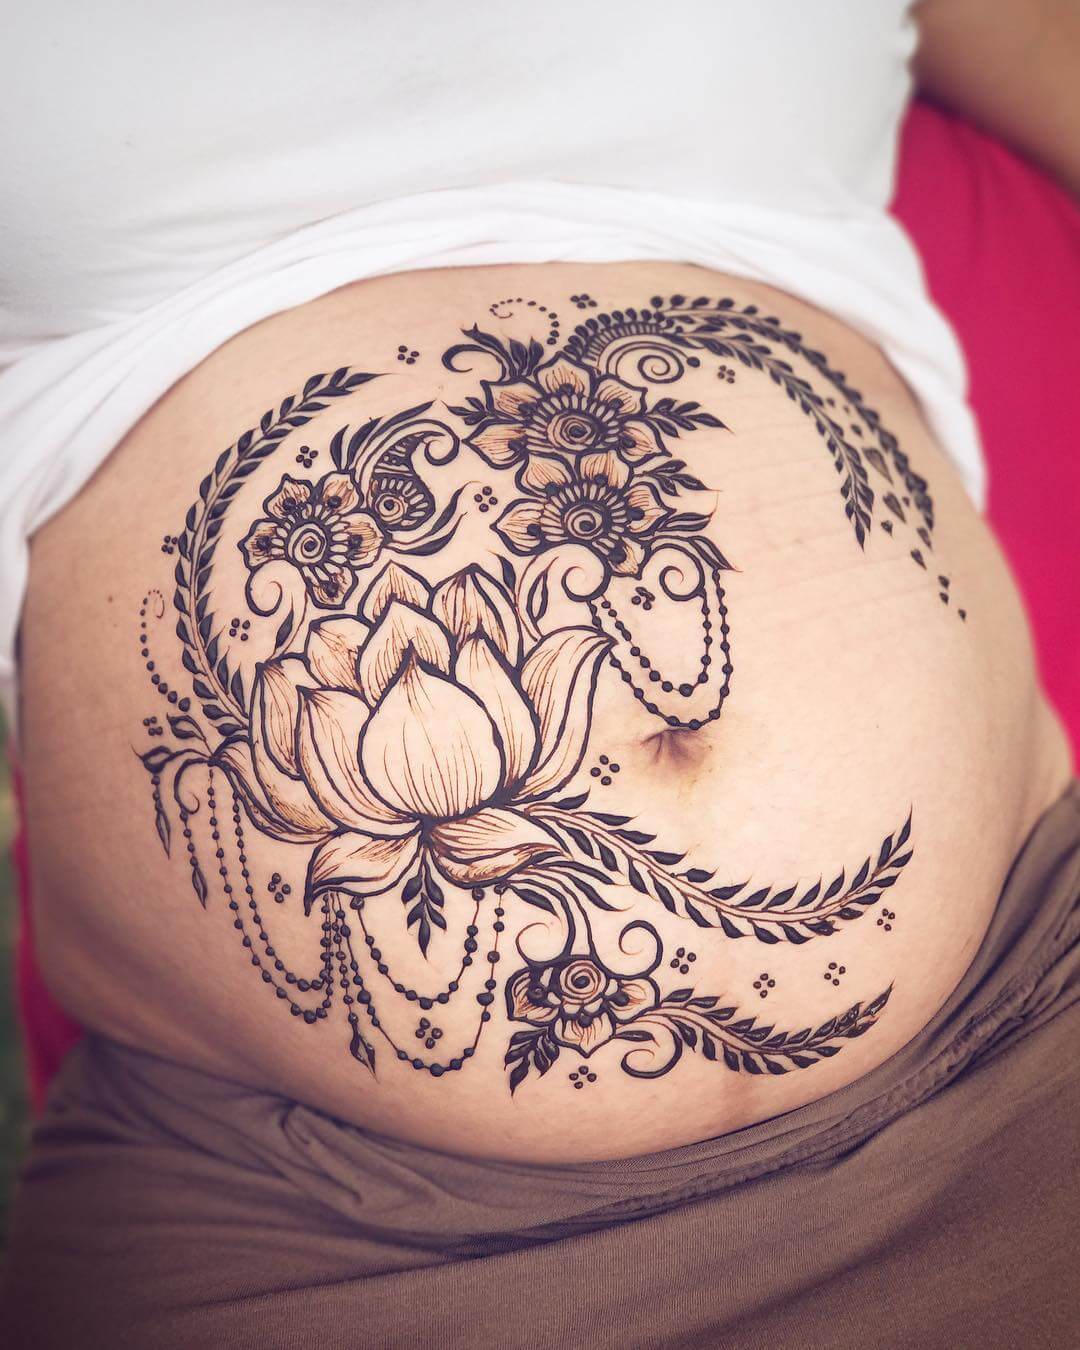 Top 15 Pregnancy Belly Mehndi Designs to Inspire 2020